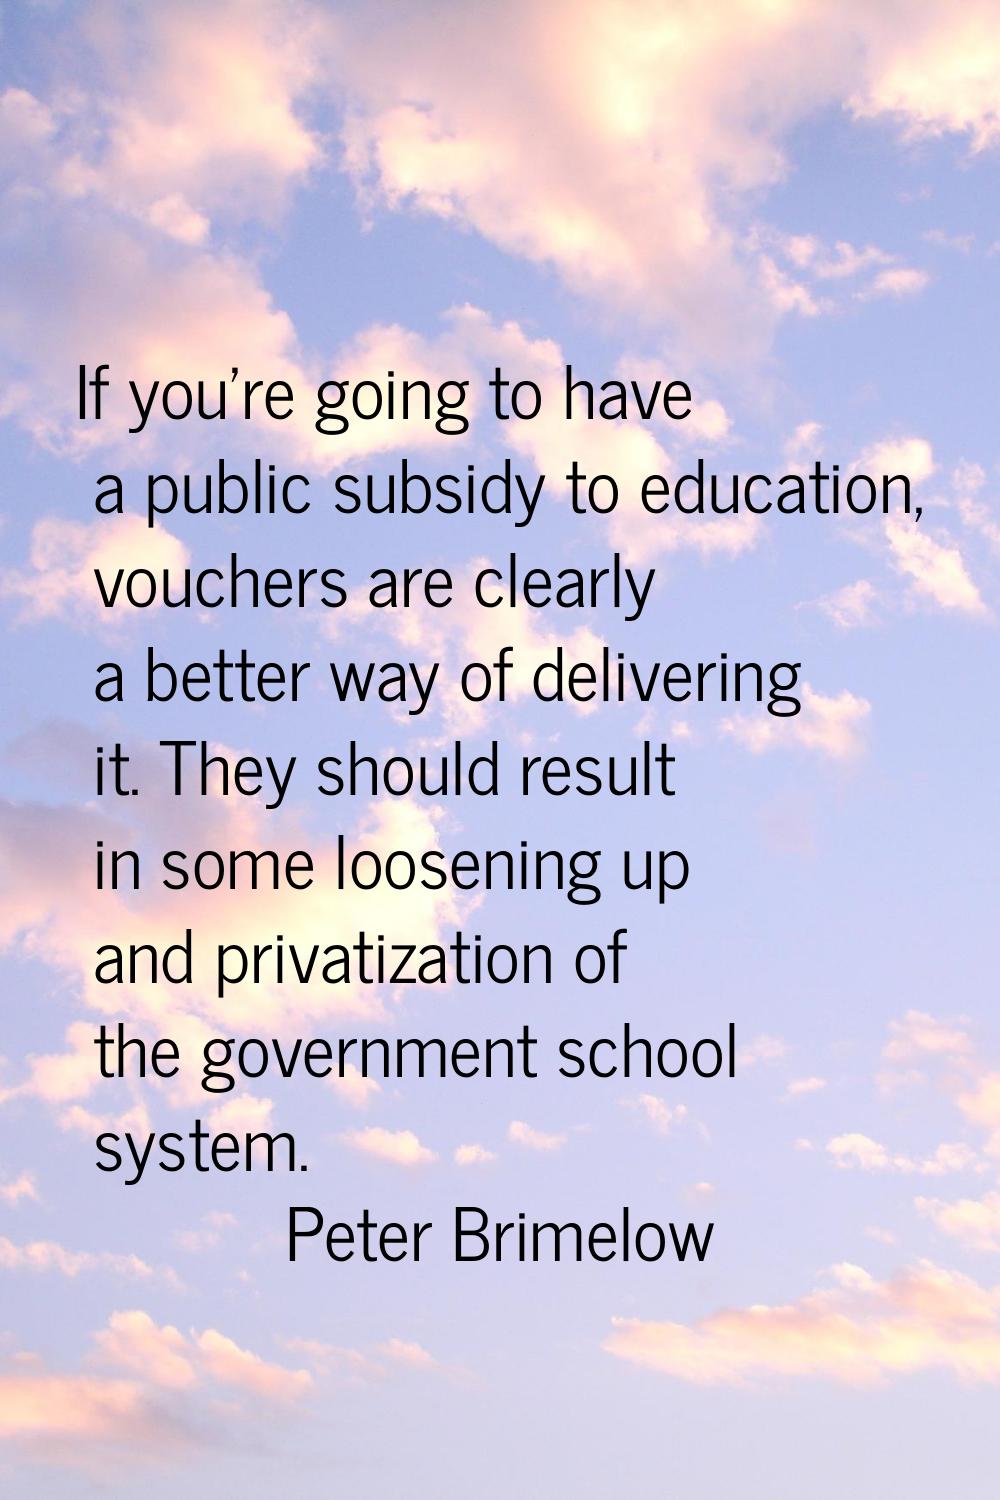 If you're going to have a public subsidy to education, vouchers are clearly a better way of deliver